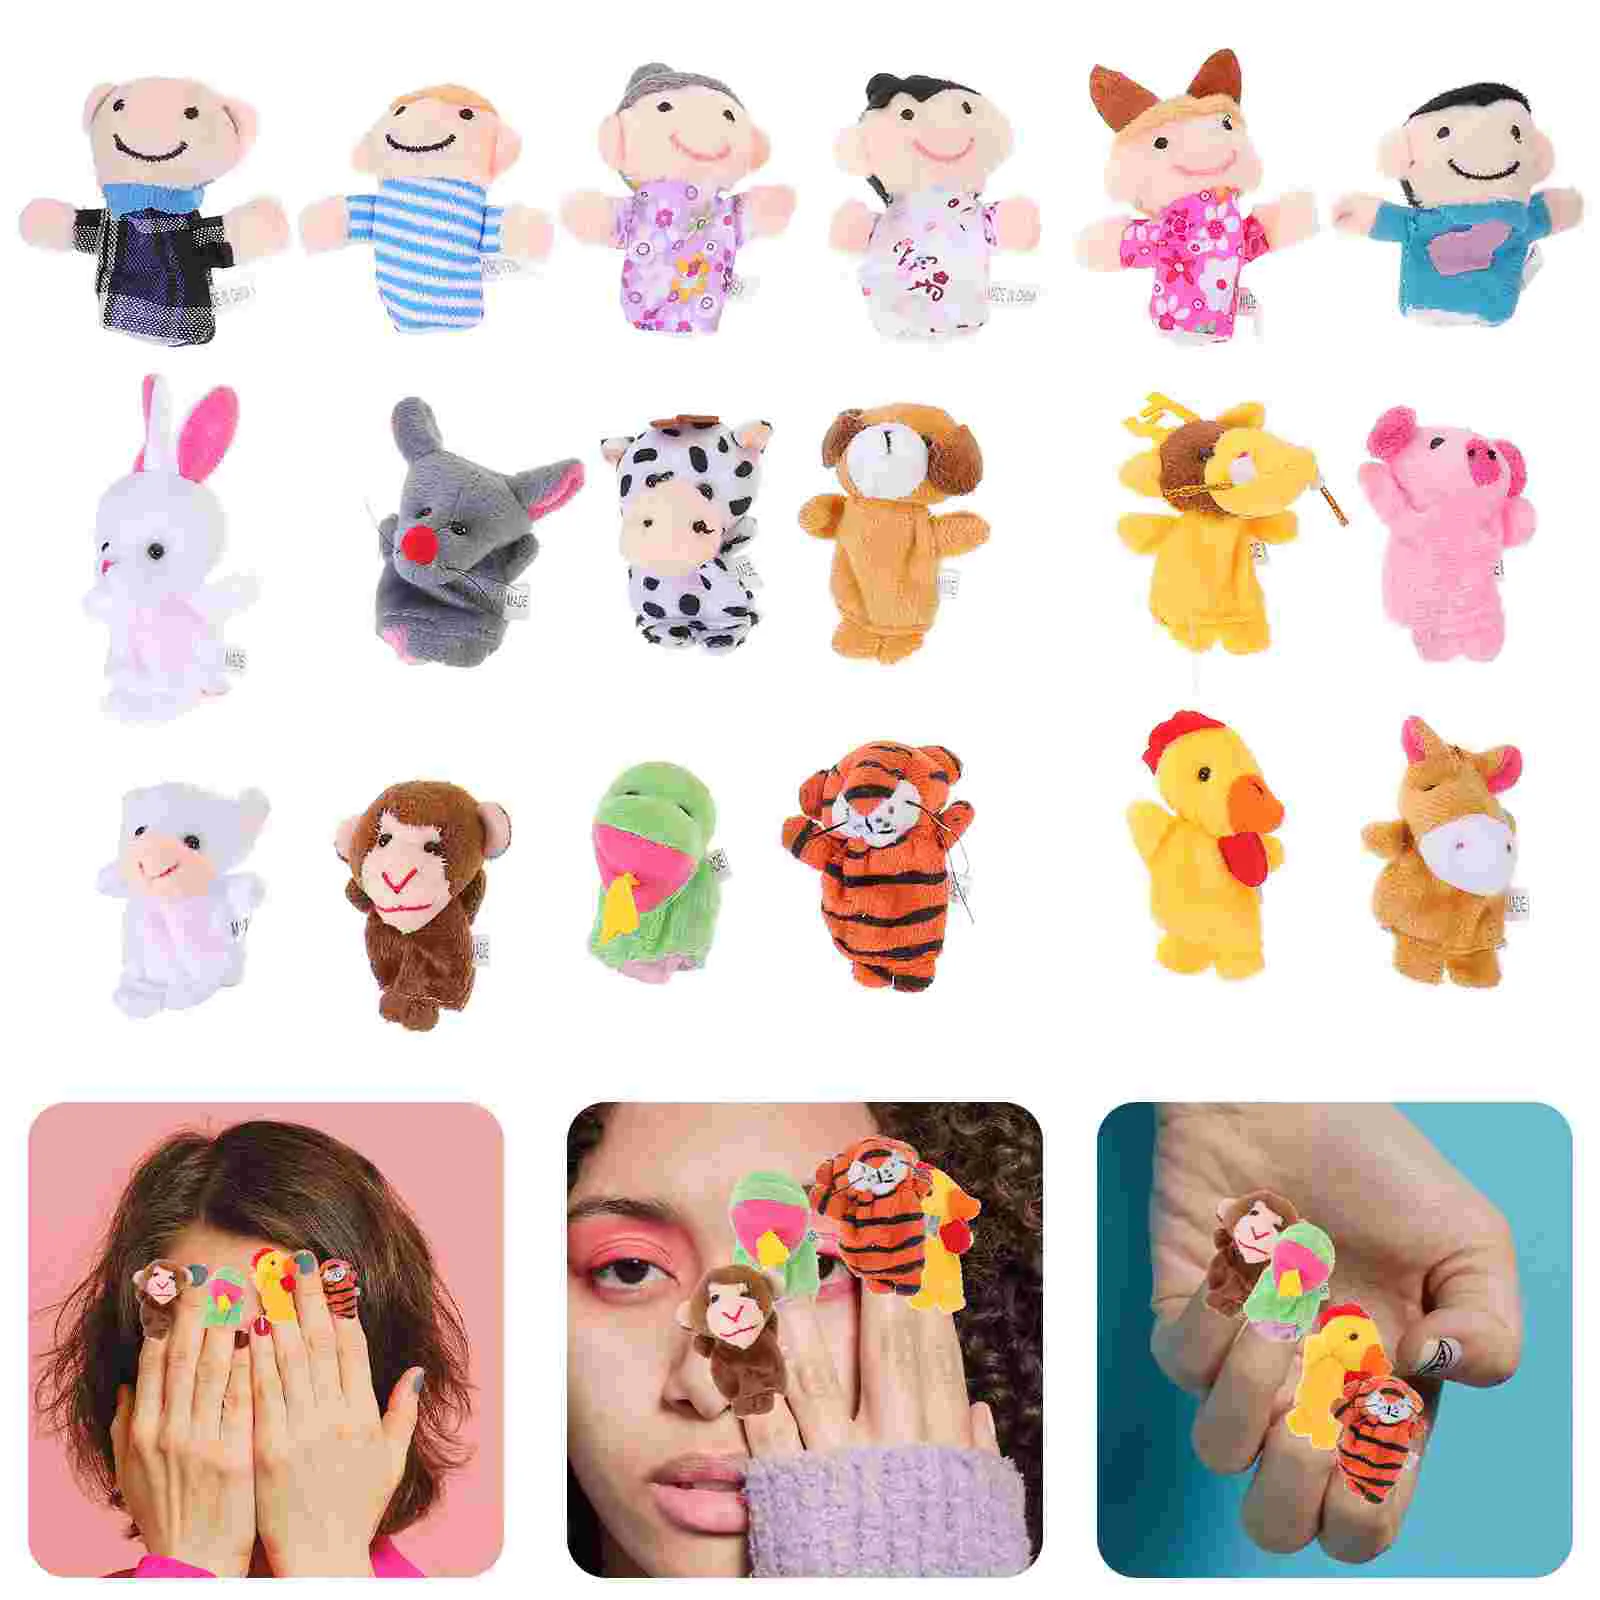 18pcs Plush Finger Puppets Dolls Hand Toys 12 Puppets 6 People(Mixed Style) for Kids Babies Talking Story Birthday Party Favors 6pcs set baby kids family finger puppets educational story game hand toys finger puppets hand puppets for kids tell story toys